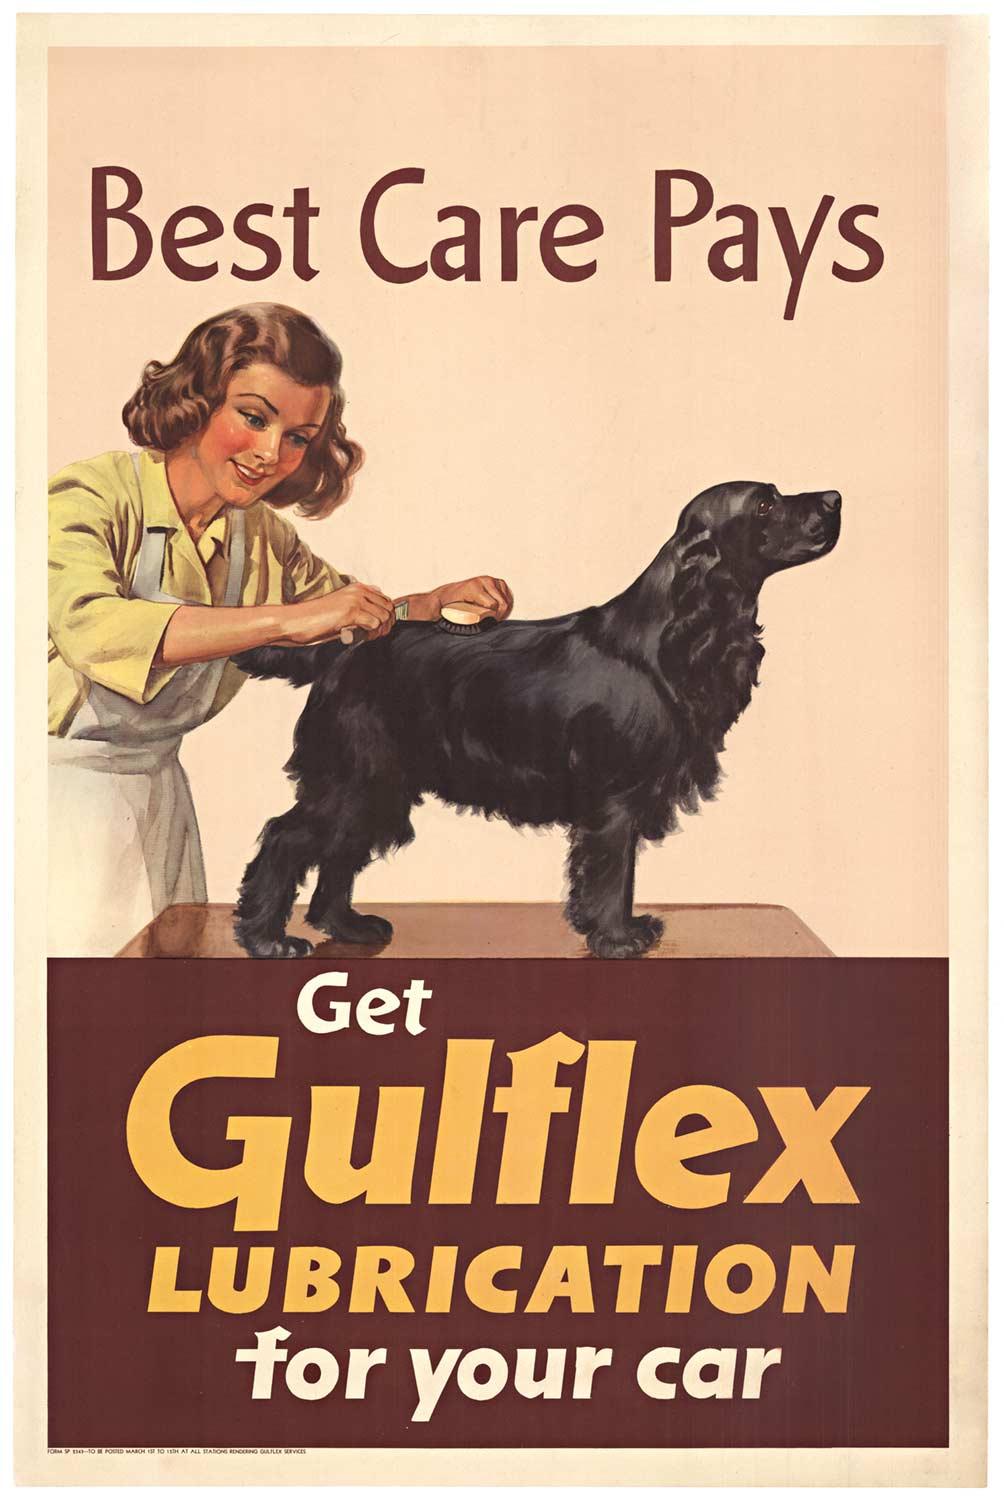 Original "Gulflex Lubrication for your car" Best Care Pays vintage poster